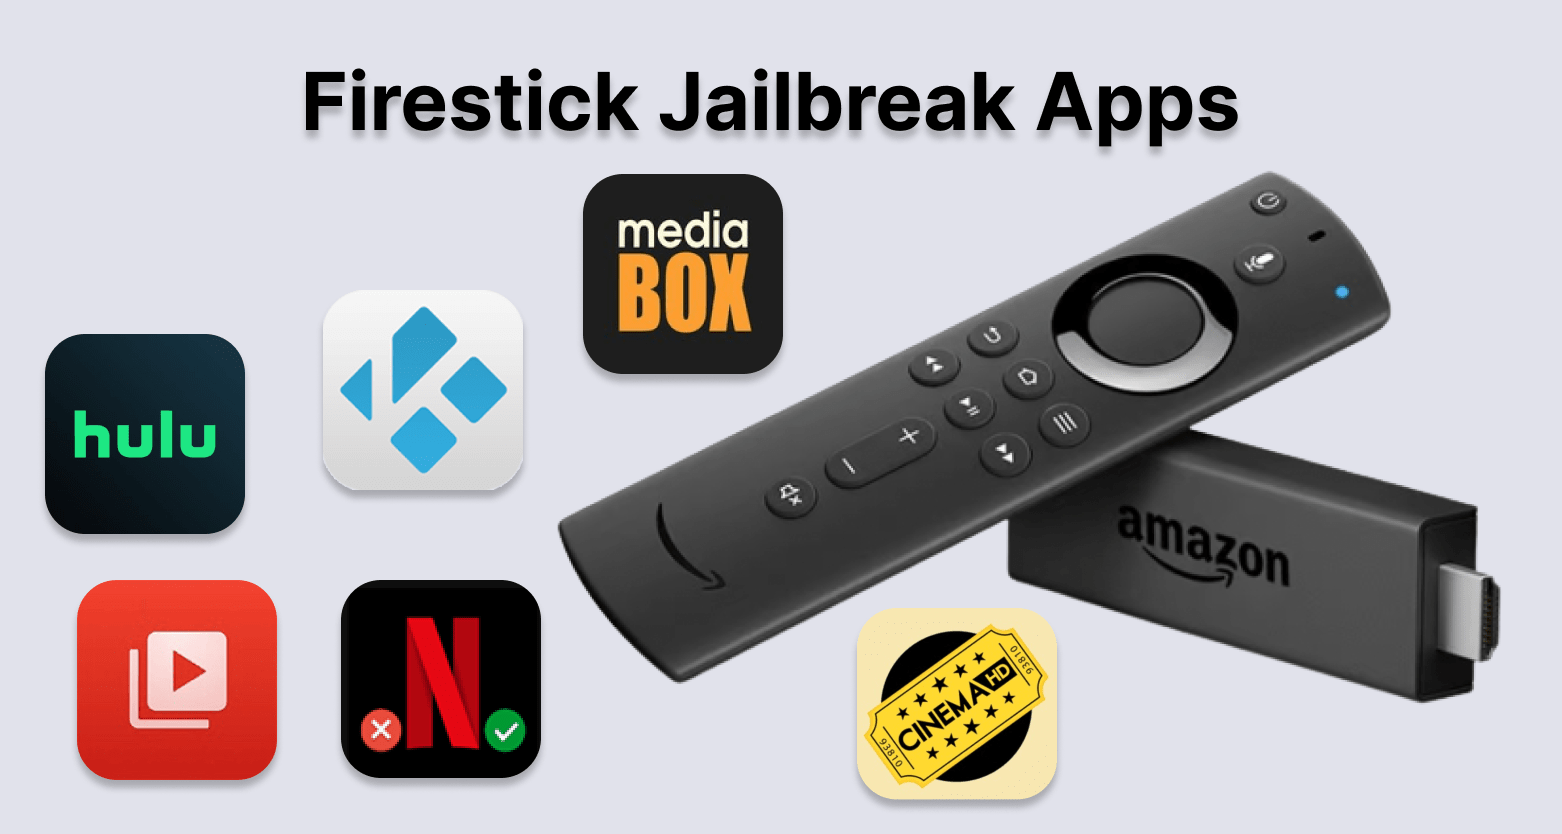 Zappfree Jailbreak App Store [Get Access to Thousands of Free Apps]